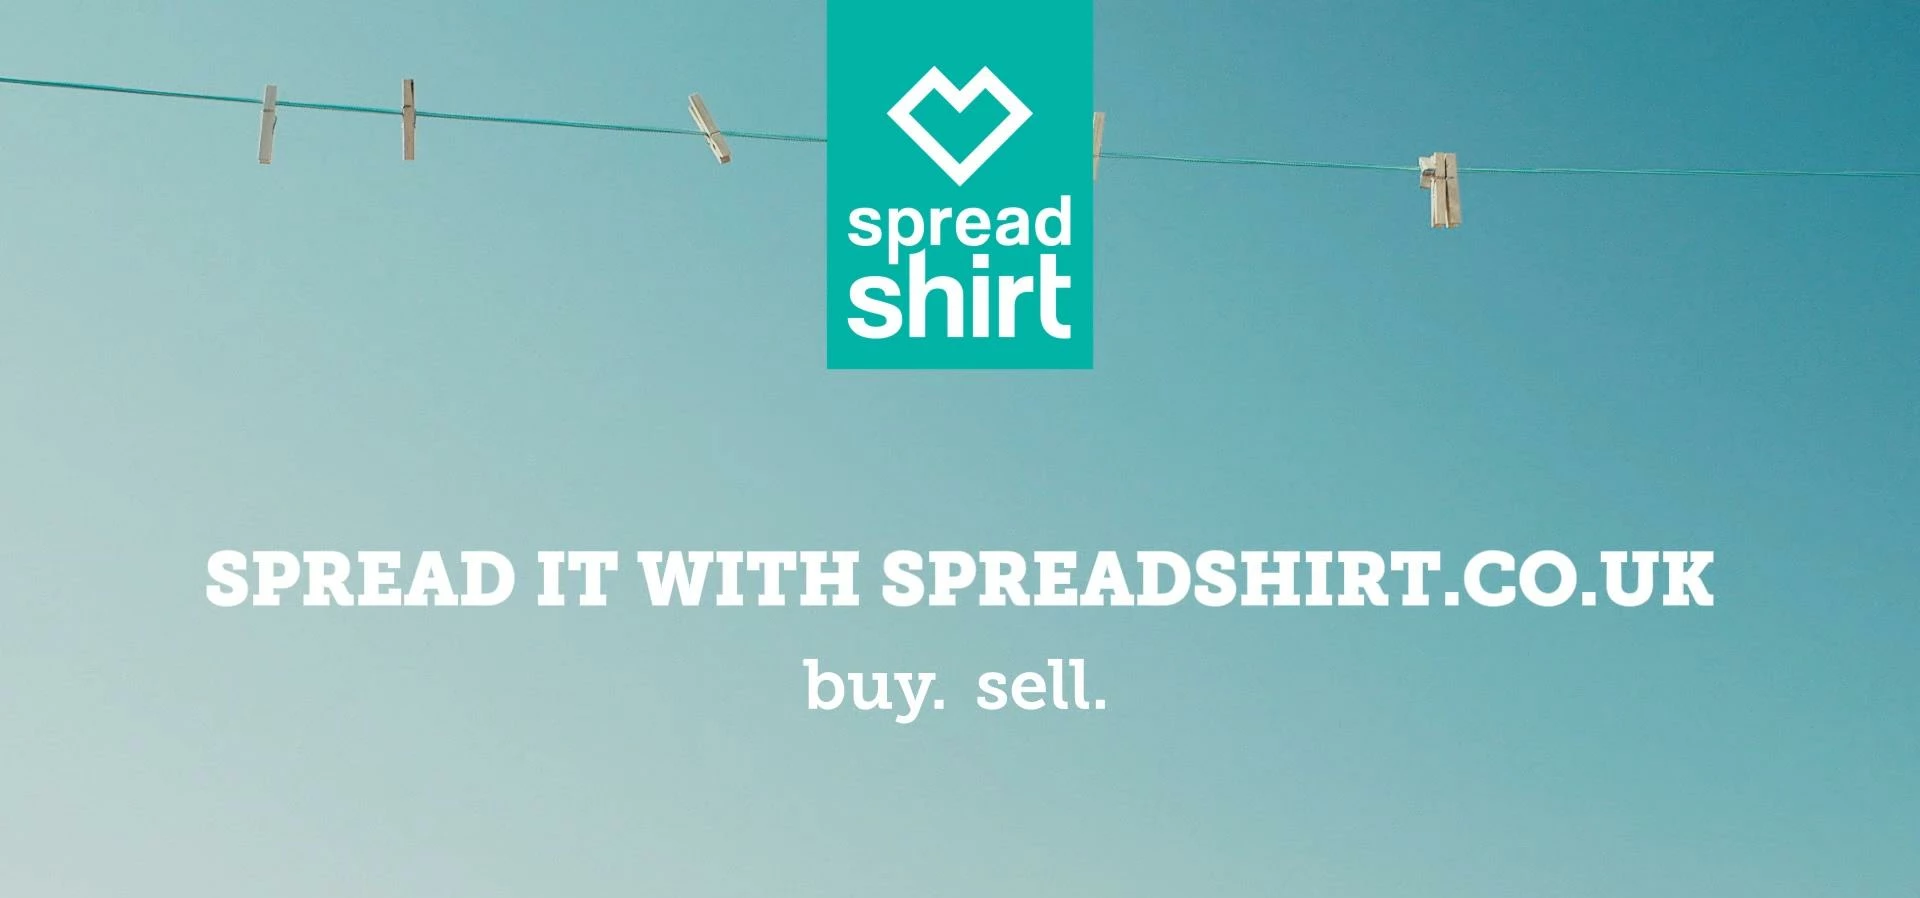 Spread it with Spreadshirt